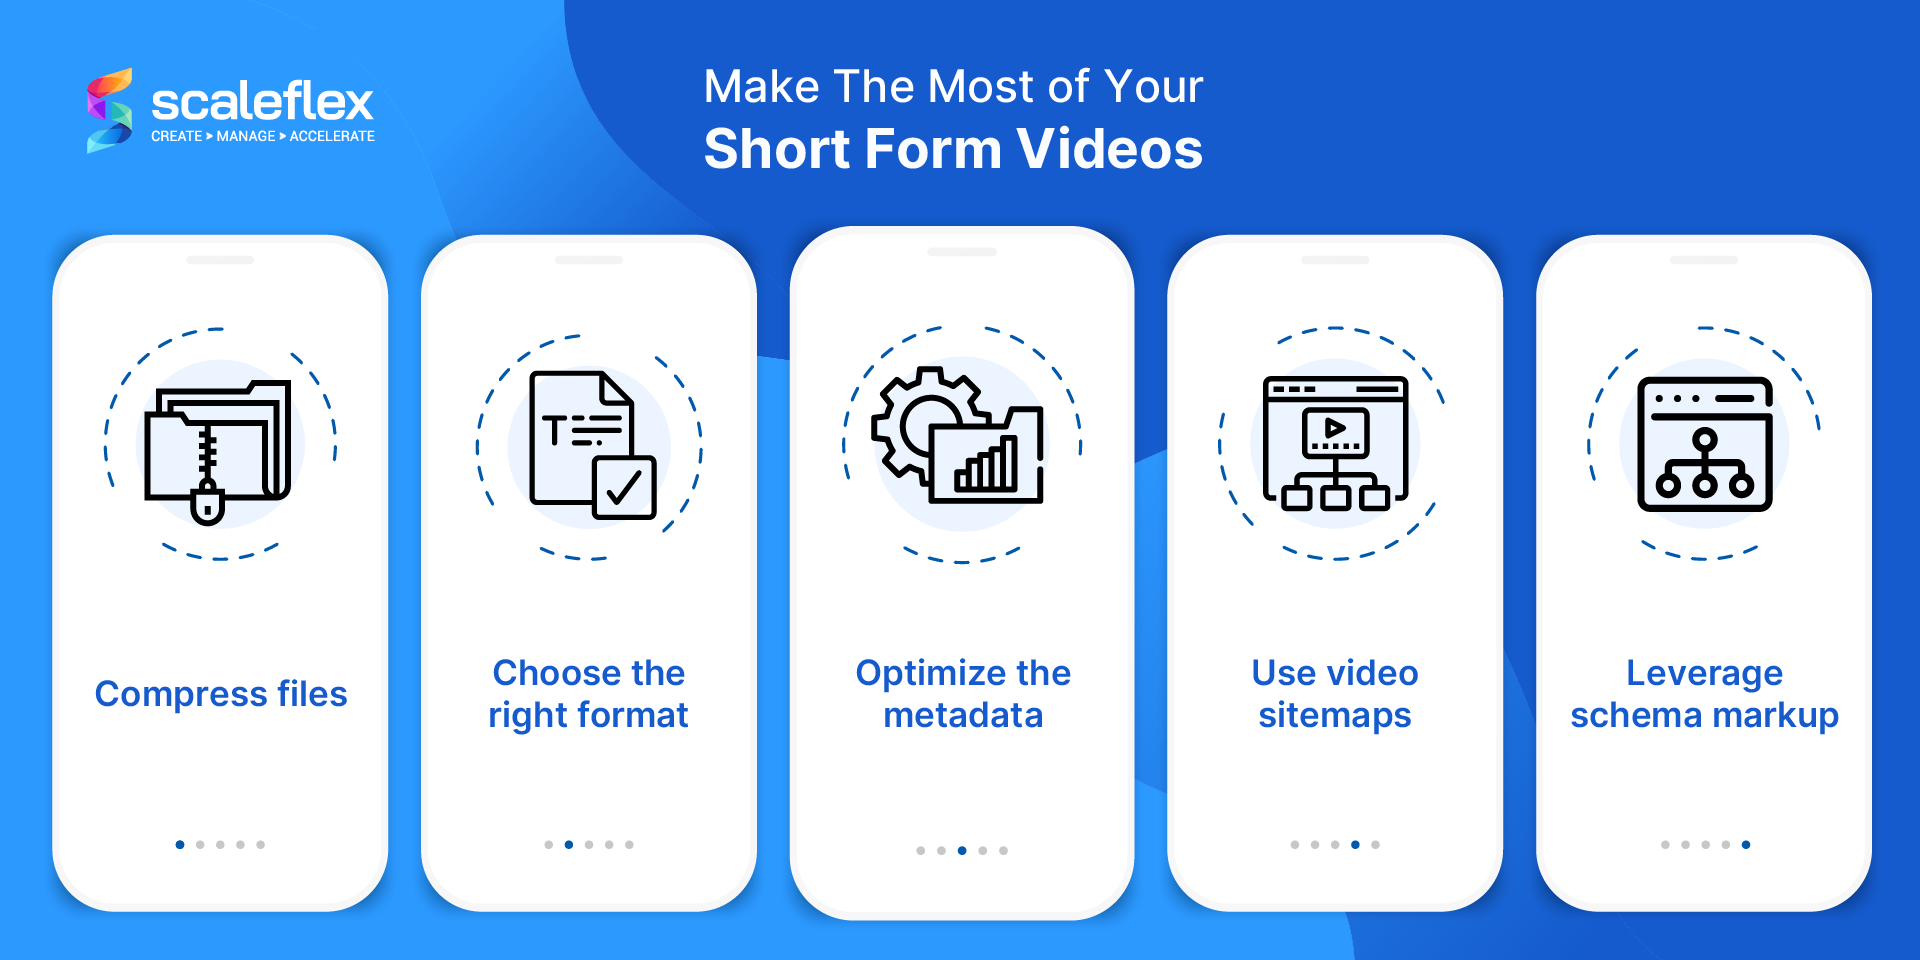 Implement different strategies in order to ensure optimum performance and quality for your short form video content.